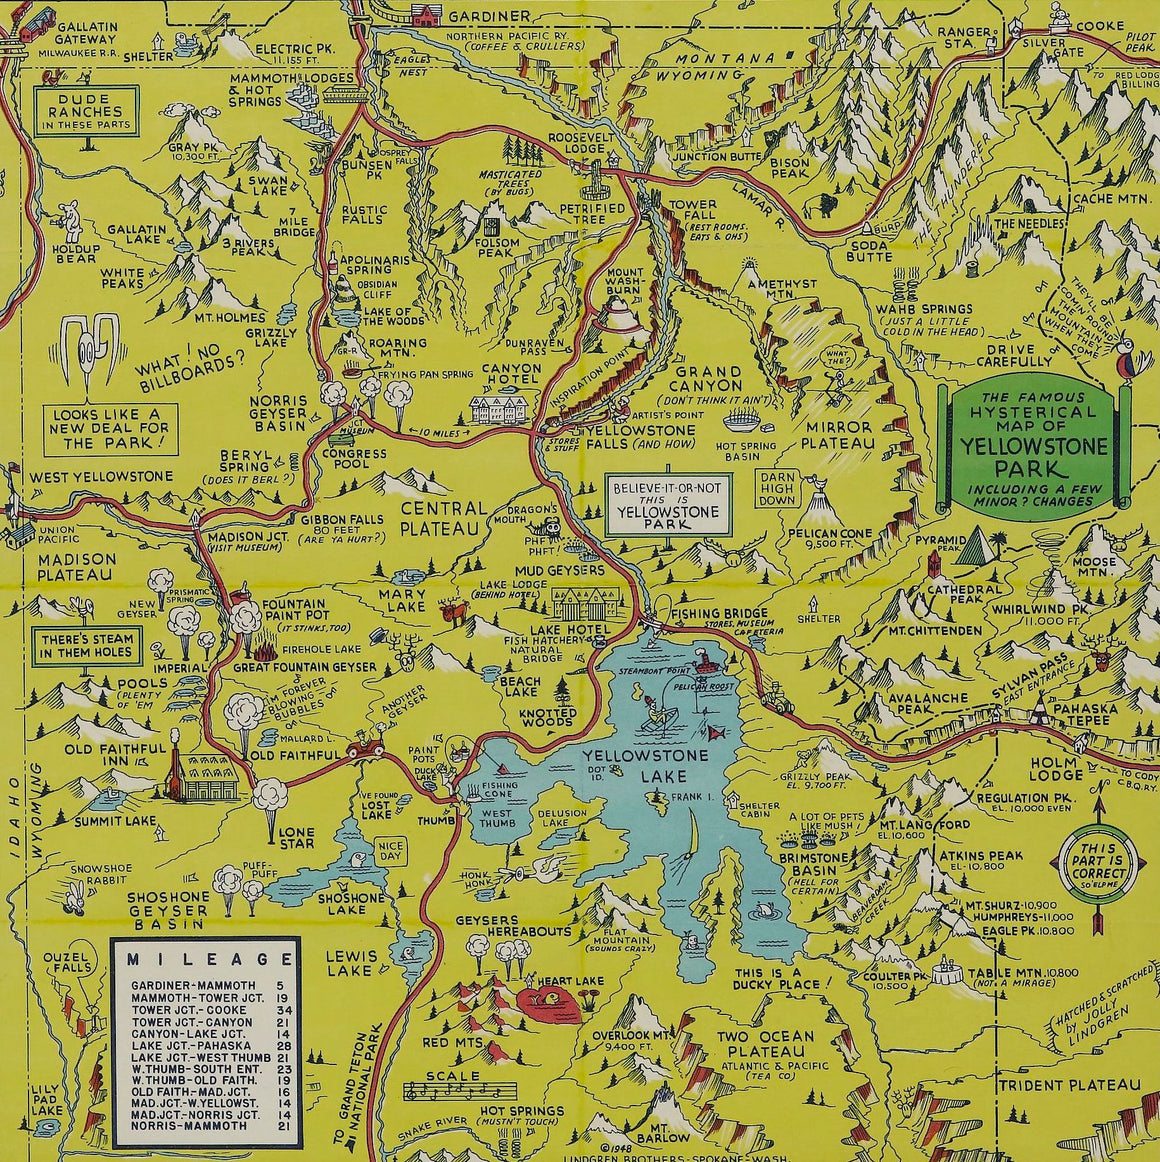 1948 "A Hysterical Map of Yellowstone National Park" by Jolly Lindgren, Second Edition Printing